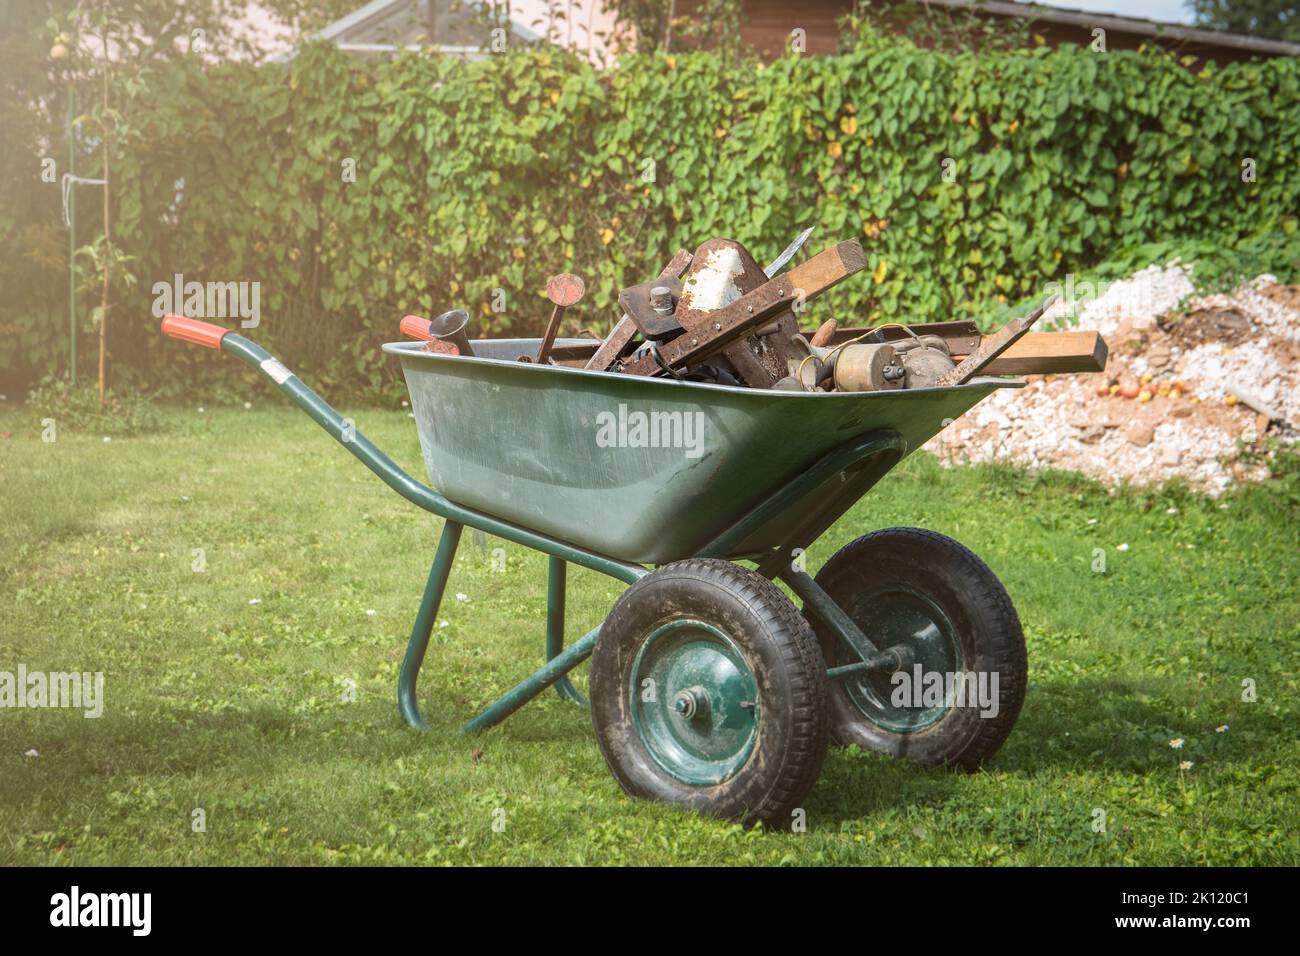 Pile of scrap metal in a barrow. Yard and garden cleaning. Stock Photo